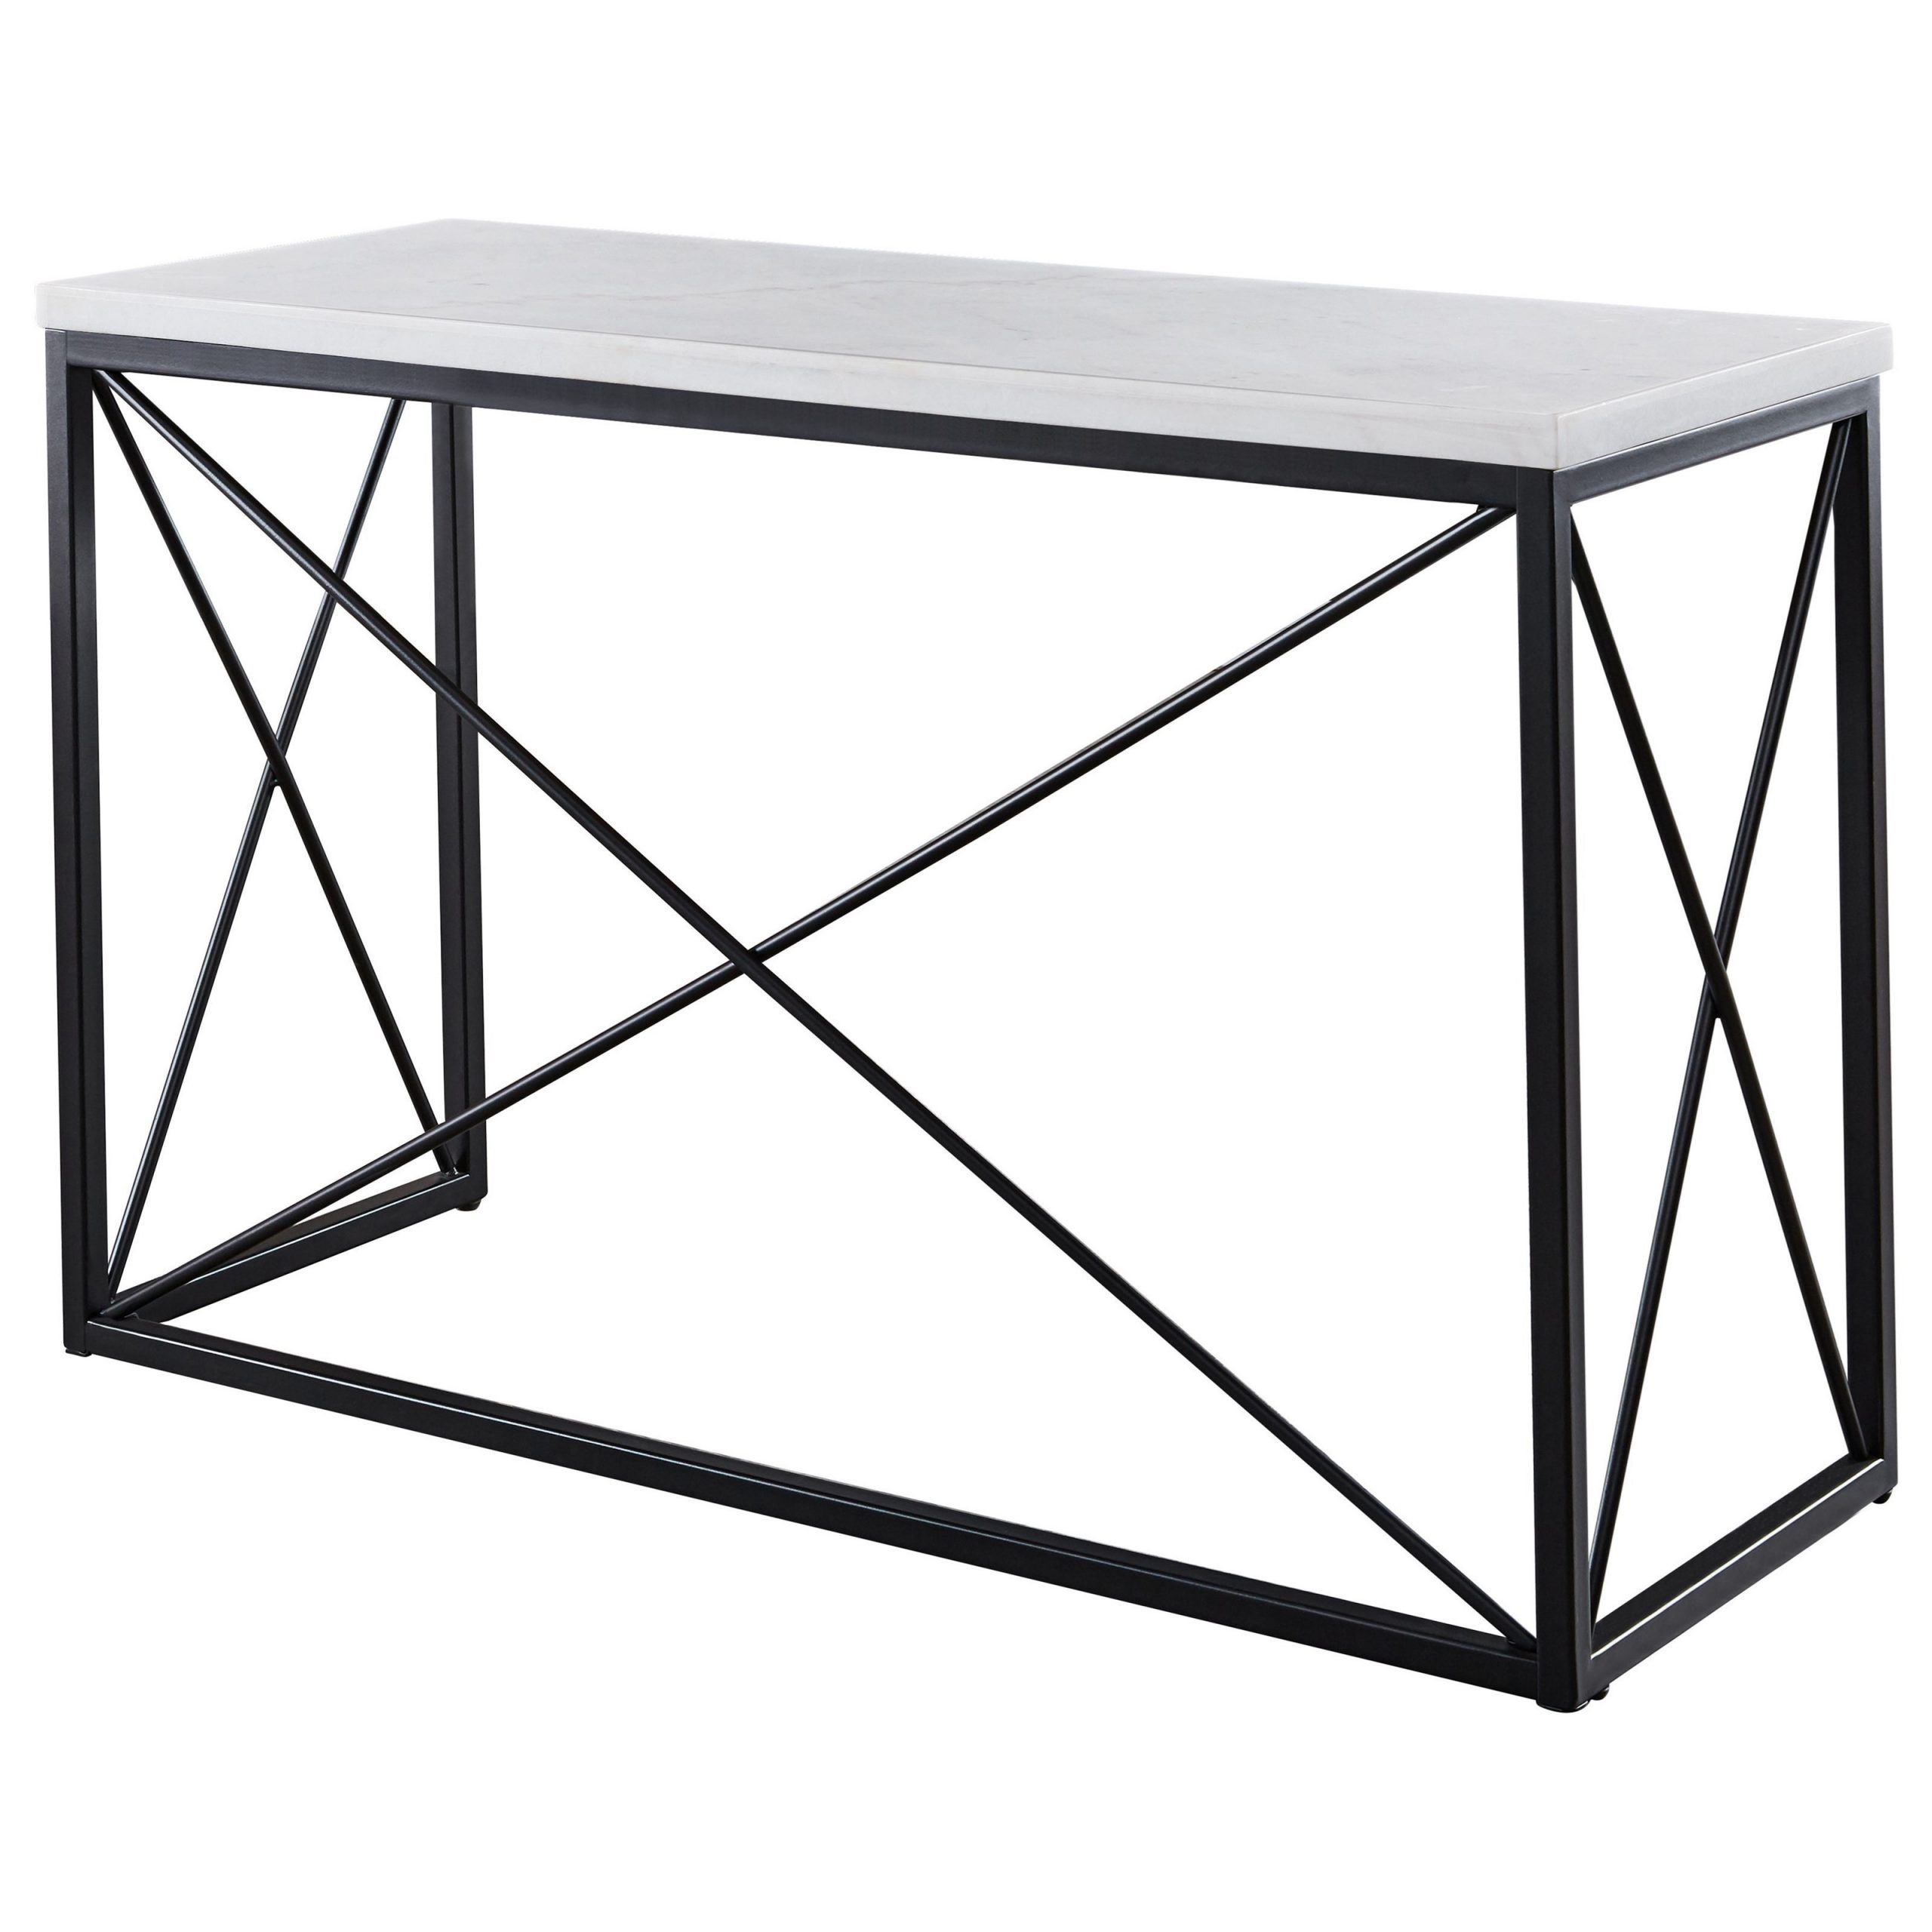 Steve Silver Skyler Contemporary White Marble Top Pertaining To Silver Leaf Rectangle Console Tables (View 12 of 20)